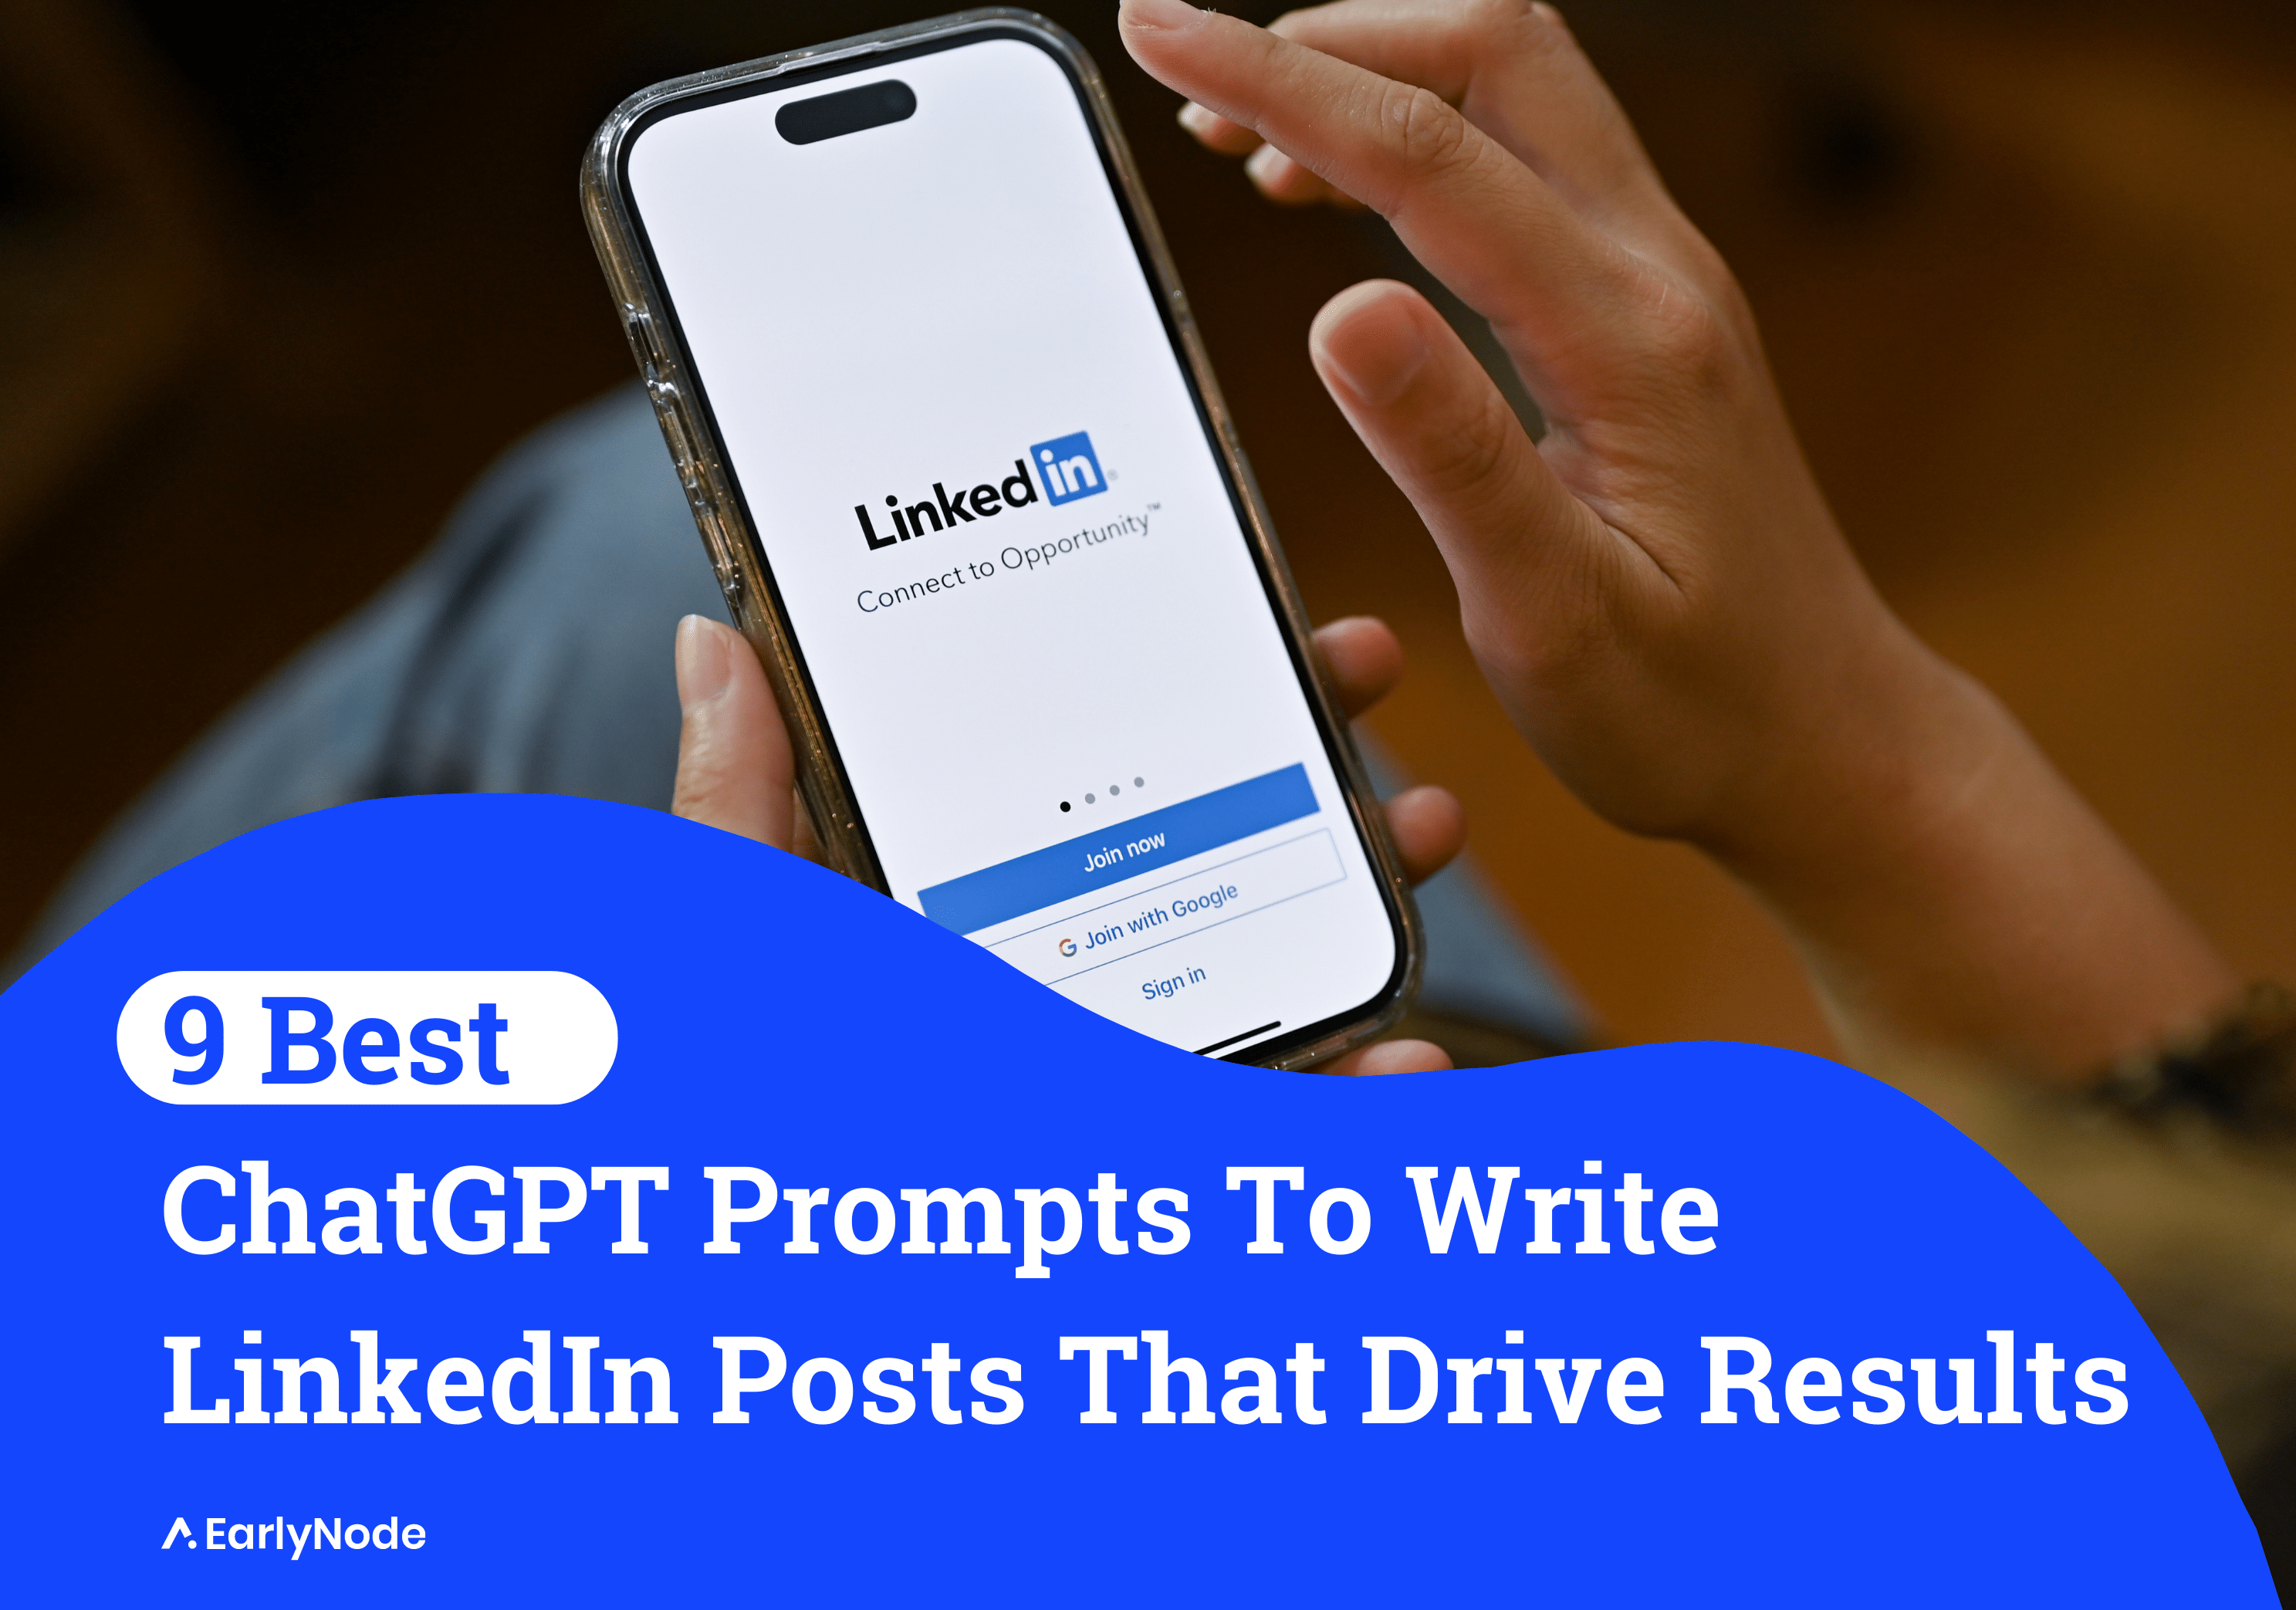 9 ChatGPT Prompts To Boost Your LinkedIn Content Strategy